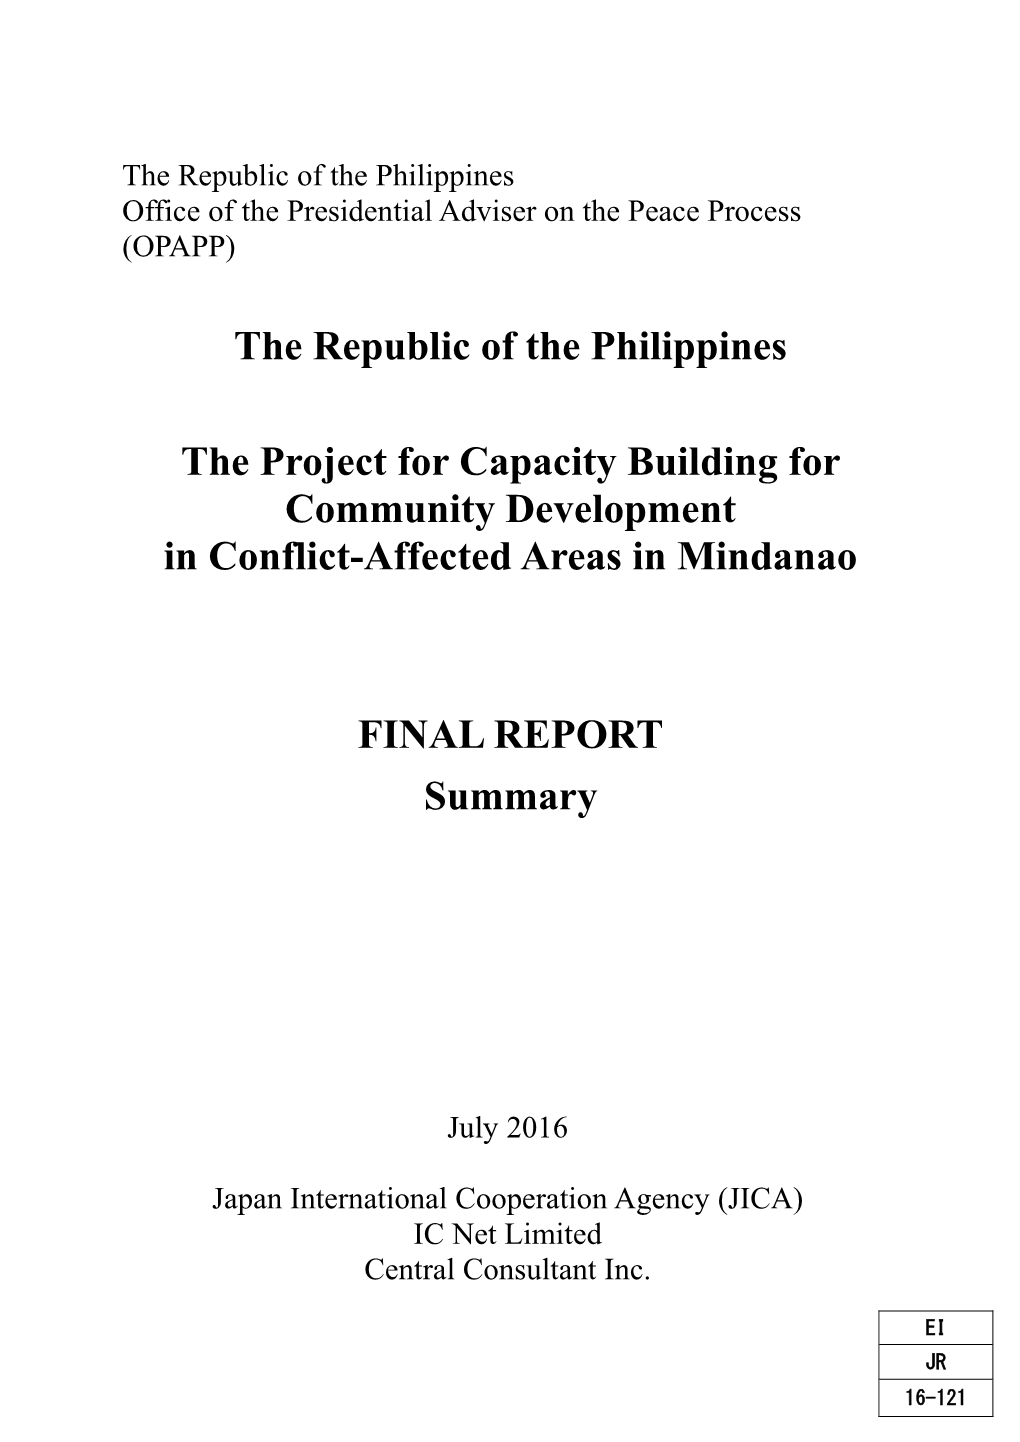 The Republic of the Philippines the Project for Capacity Building for Community Development in Conflict-Affected Areas in Mindanao